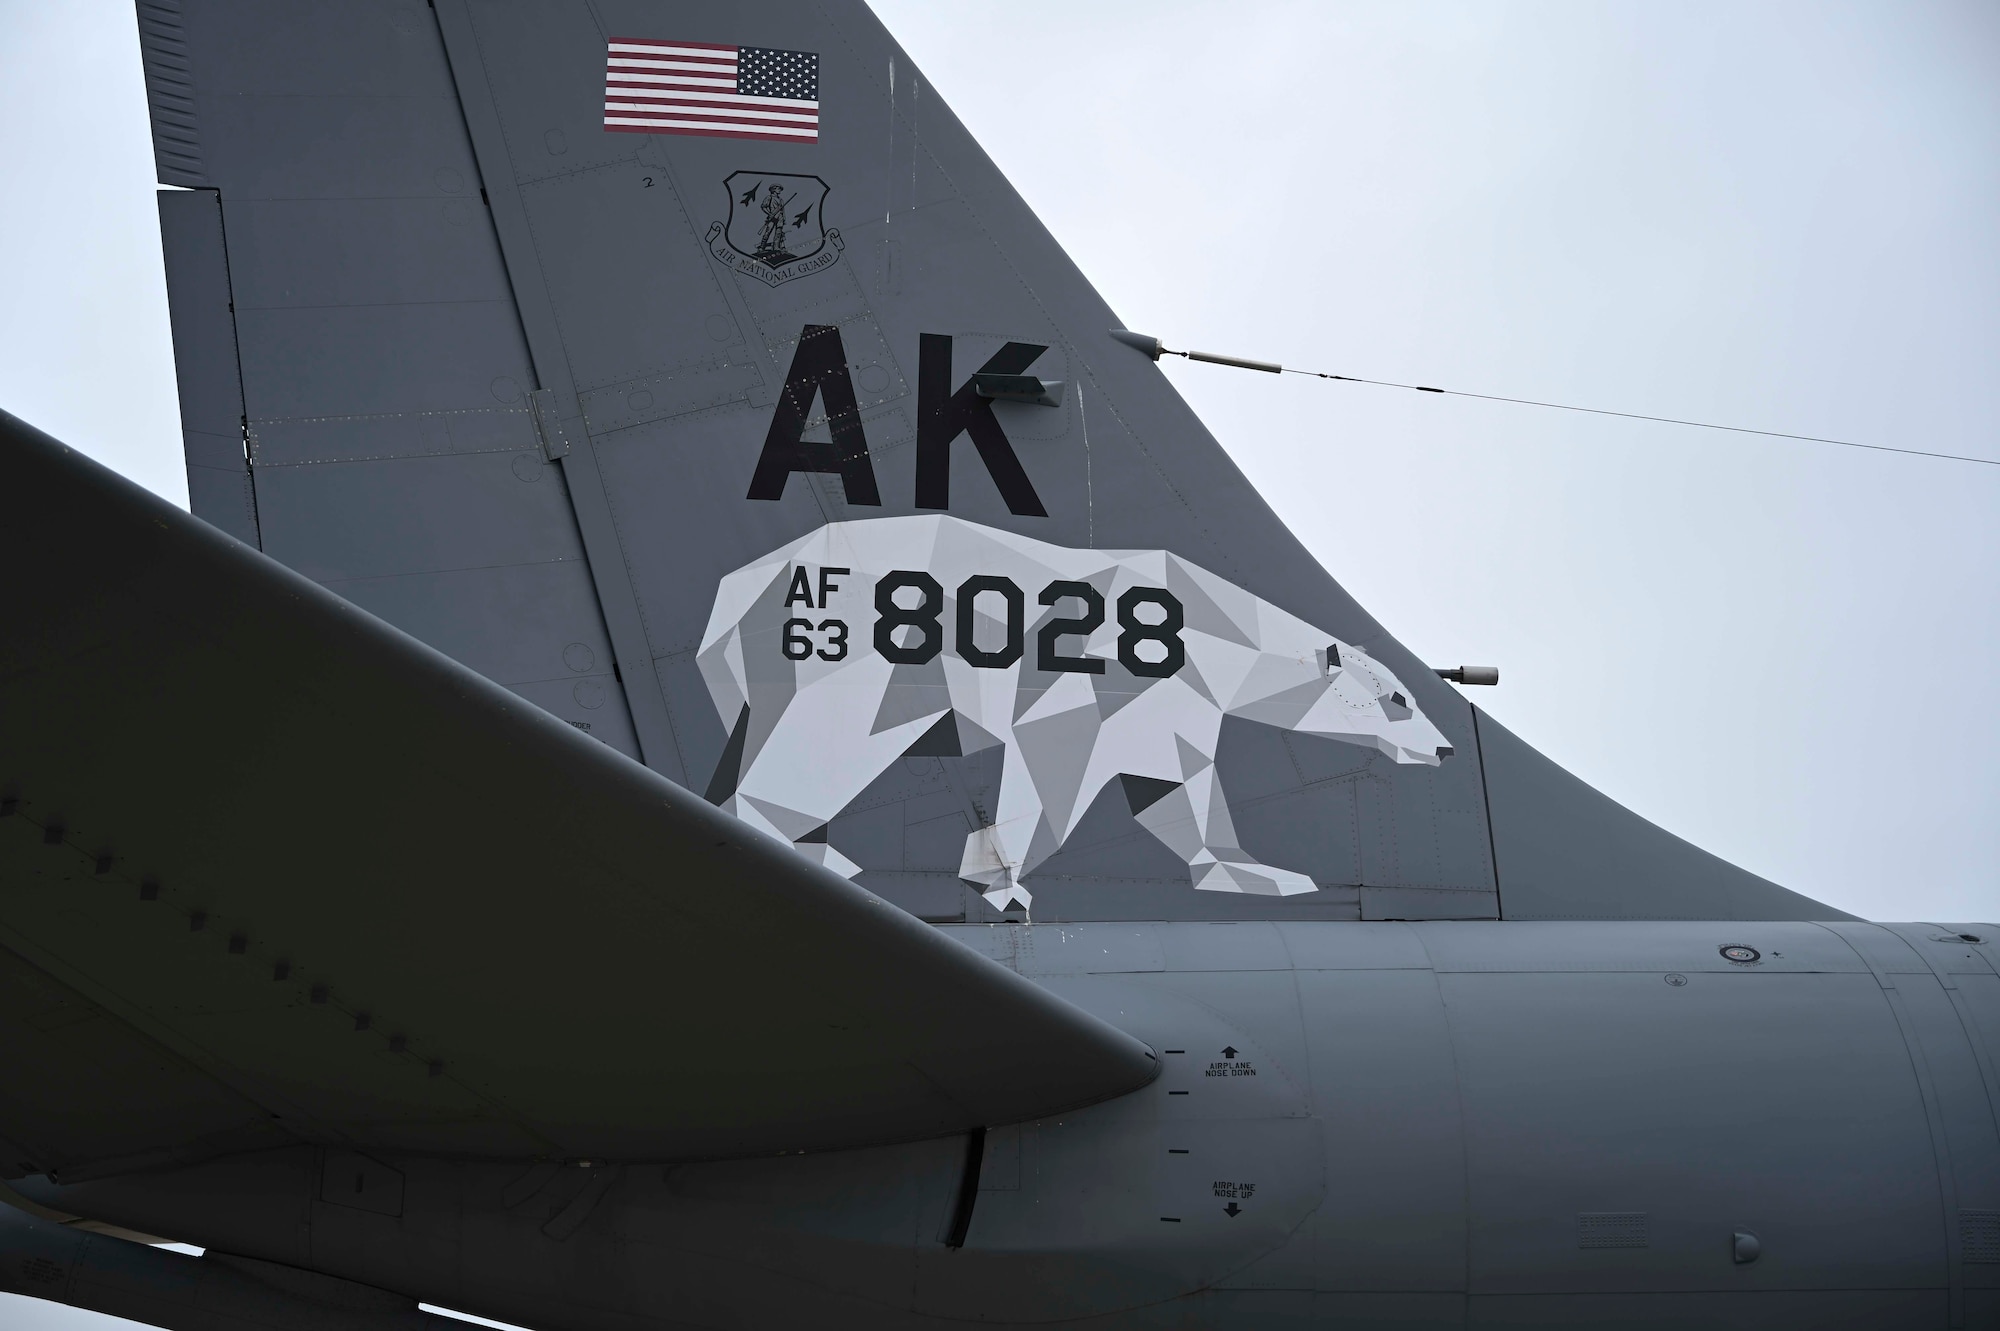 A U.S. Air Force KC-135 Stratotanker aircraft receives fuel on the flightline at Royal Air Force Mildenhall, England, Aug. 1, 2022. The pantograph is a stationary refueling system that connects directly to any U.S. military aircrafts or external tanks for efficient refueling. (U.S. Air Force photo by Airman 1st Class Viviam Chiu).